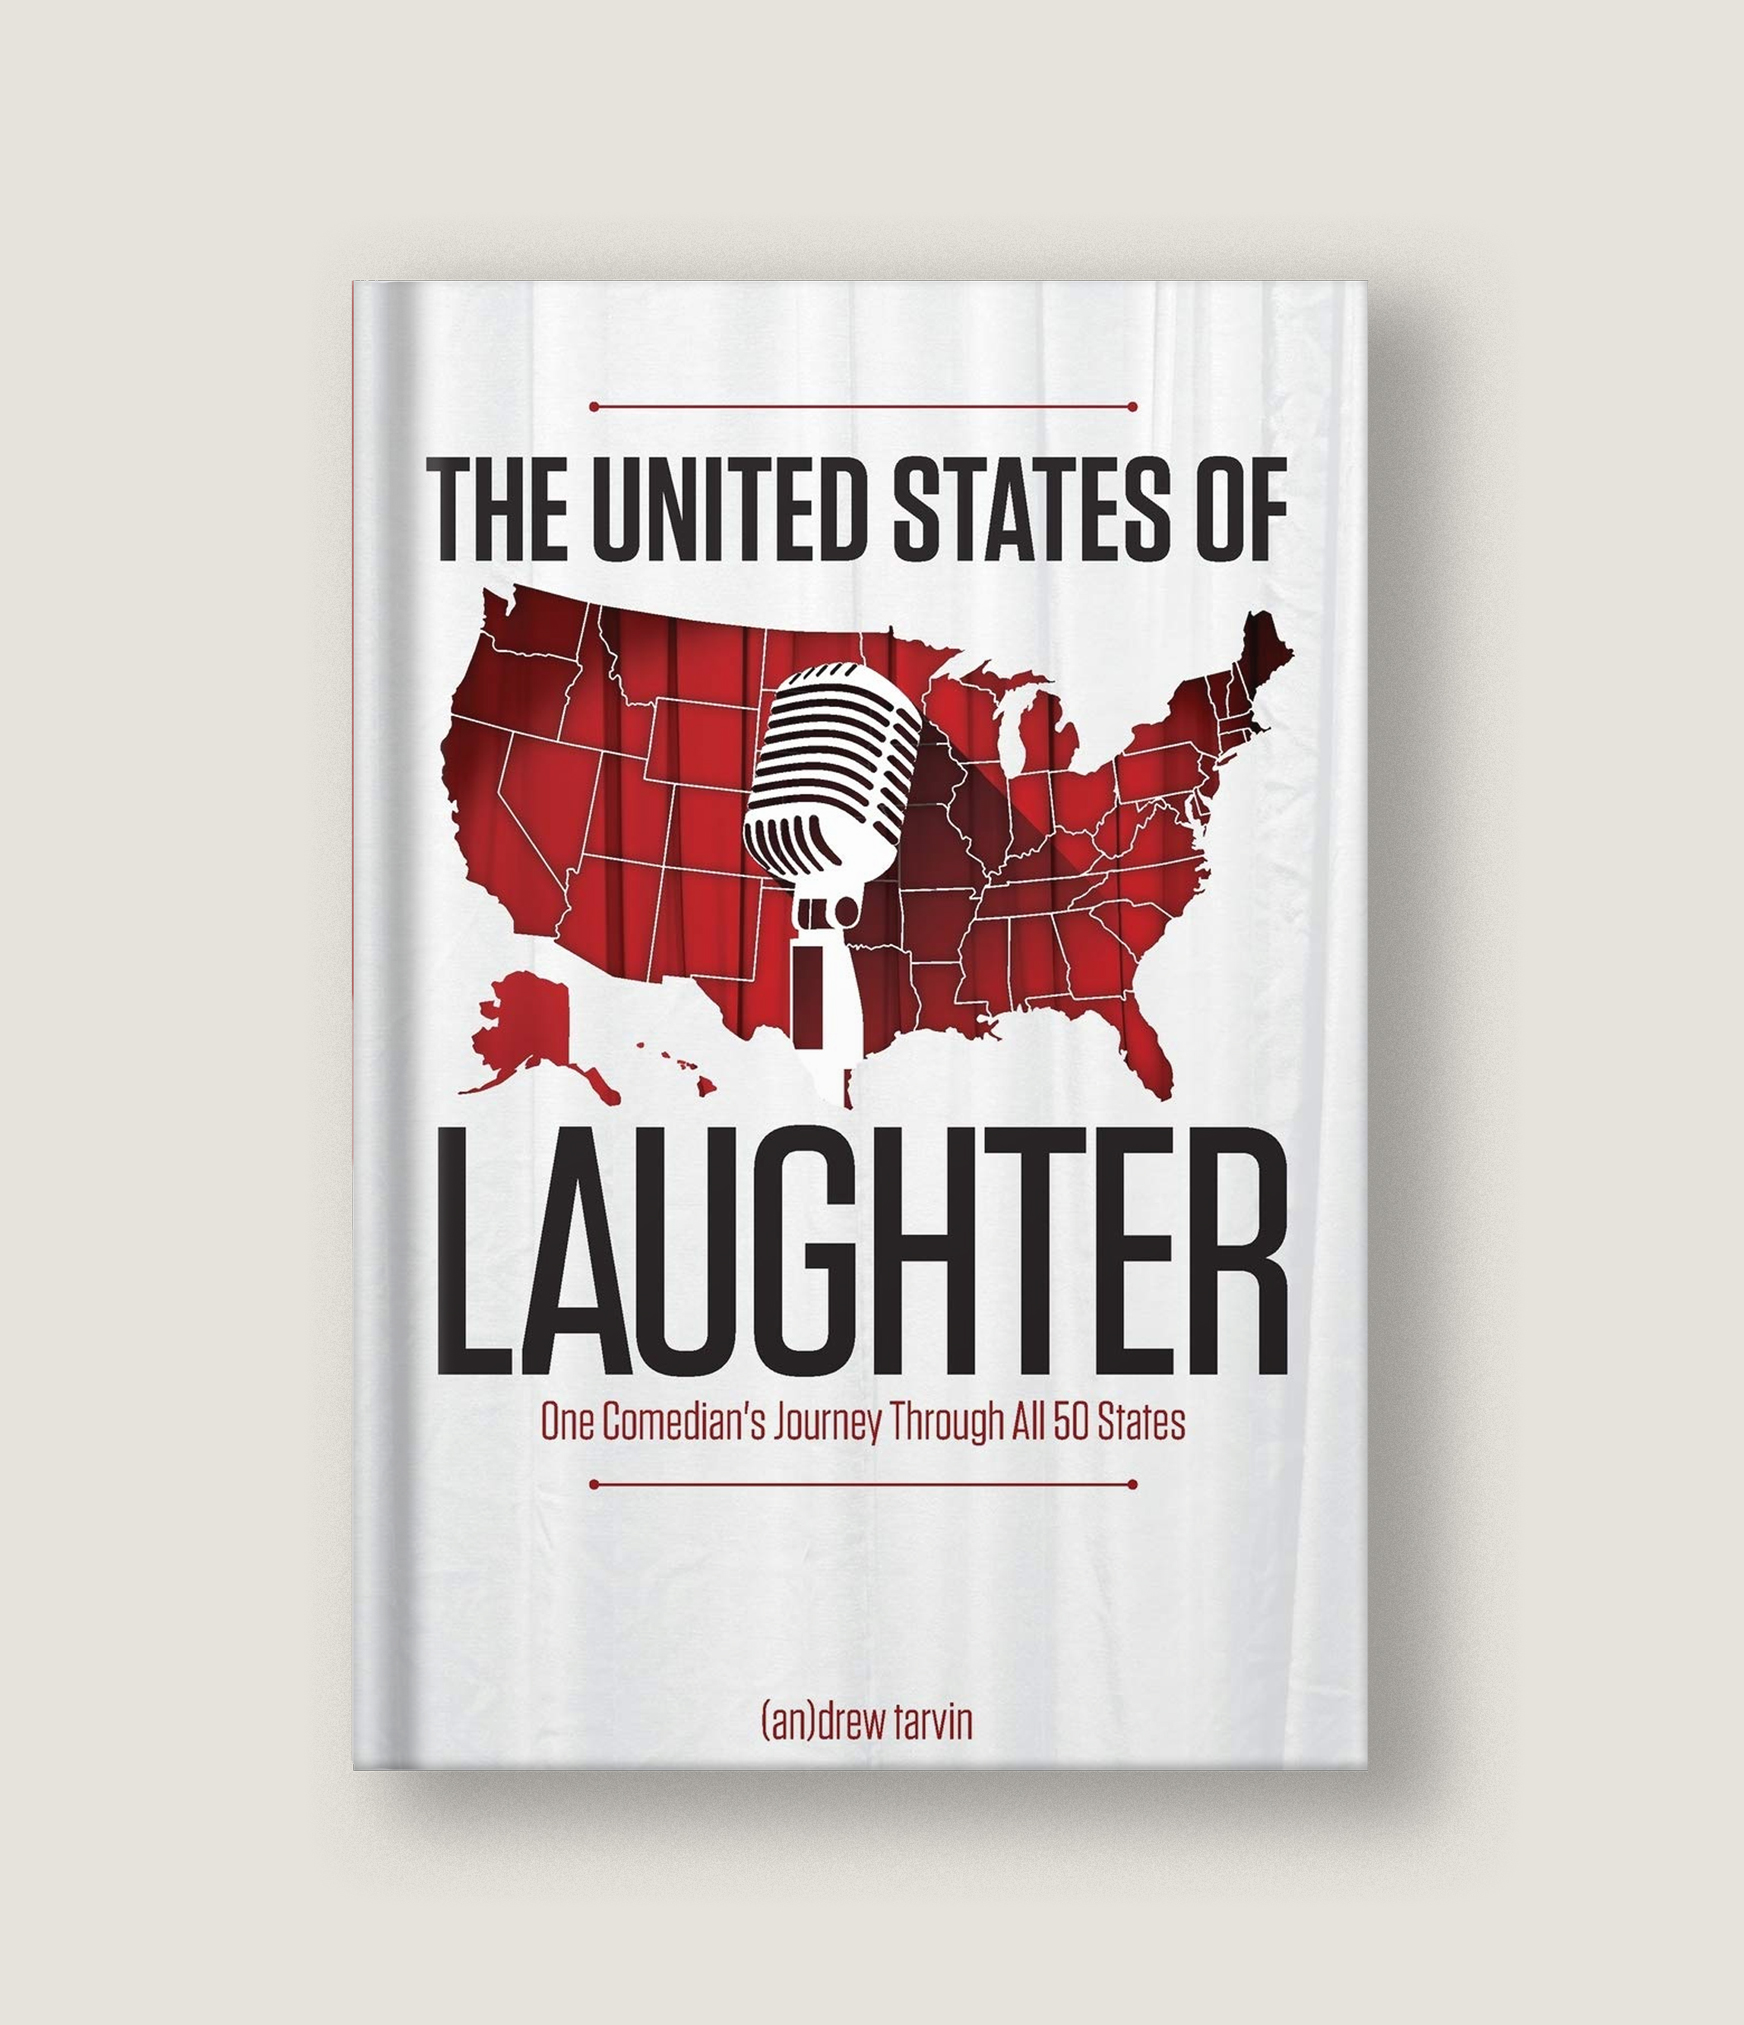 united-states-of-laughter-cover-andrew-tarvin-humor-engineer